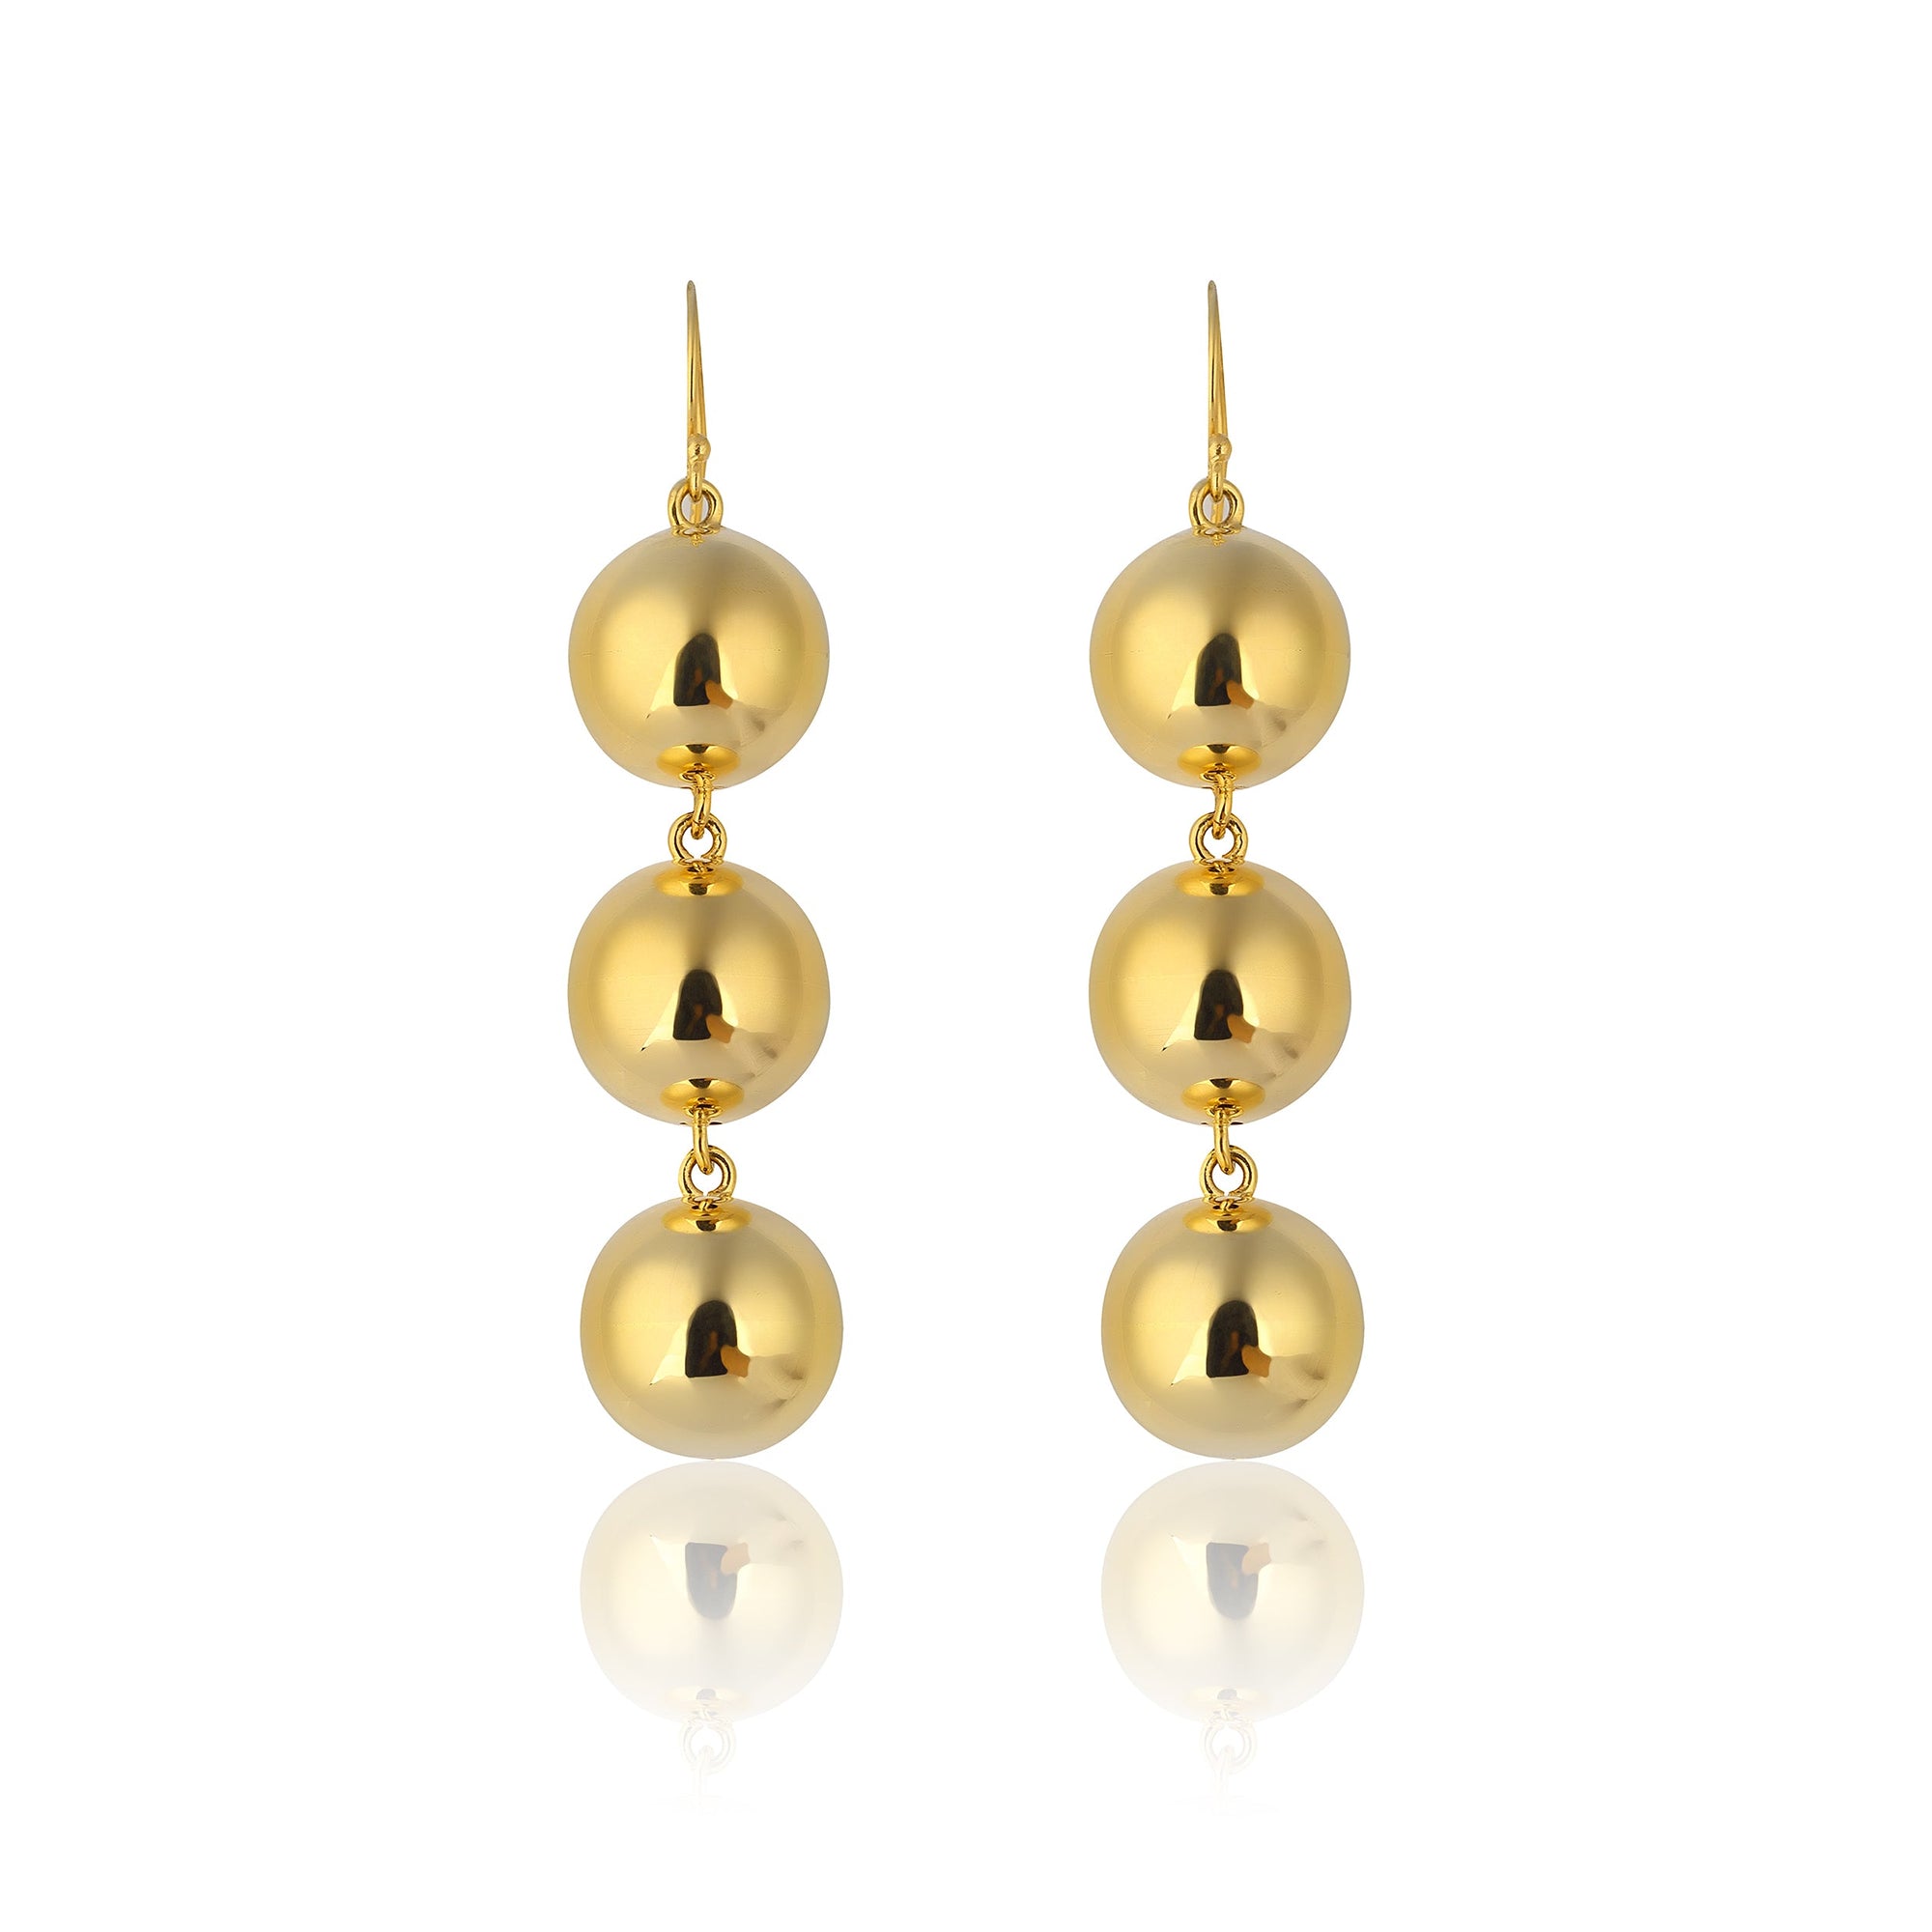 4 Sizes Woman 18K Gold Plated Stainless Steel Polished Beaded Ball Earring  Stud  eBay